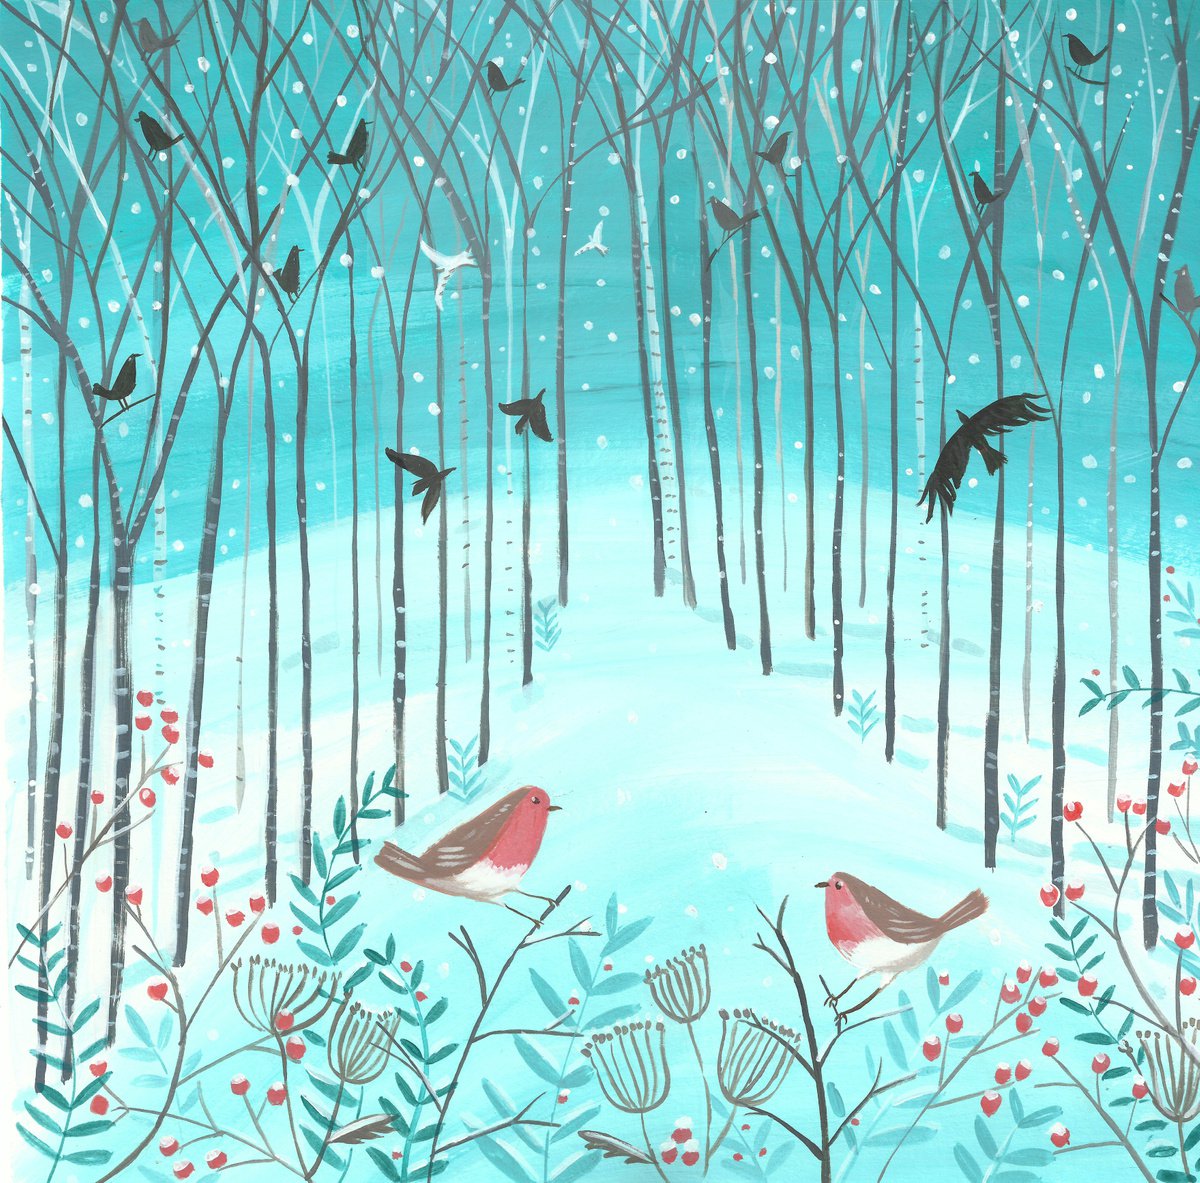 Winter Forest by Mary Stubberfield